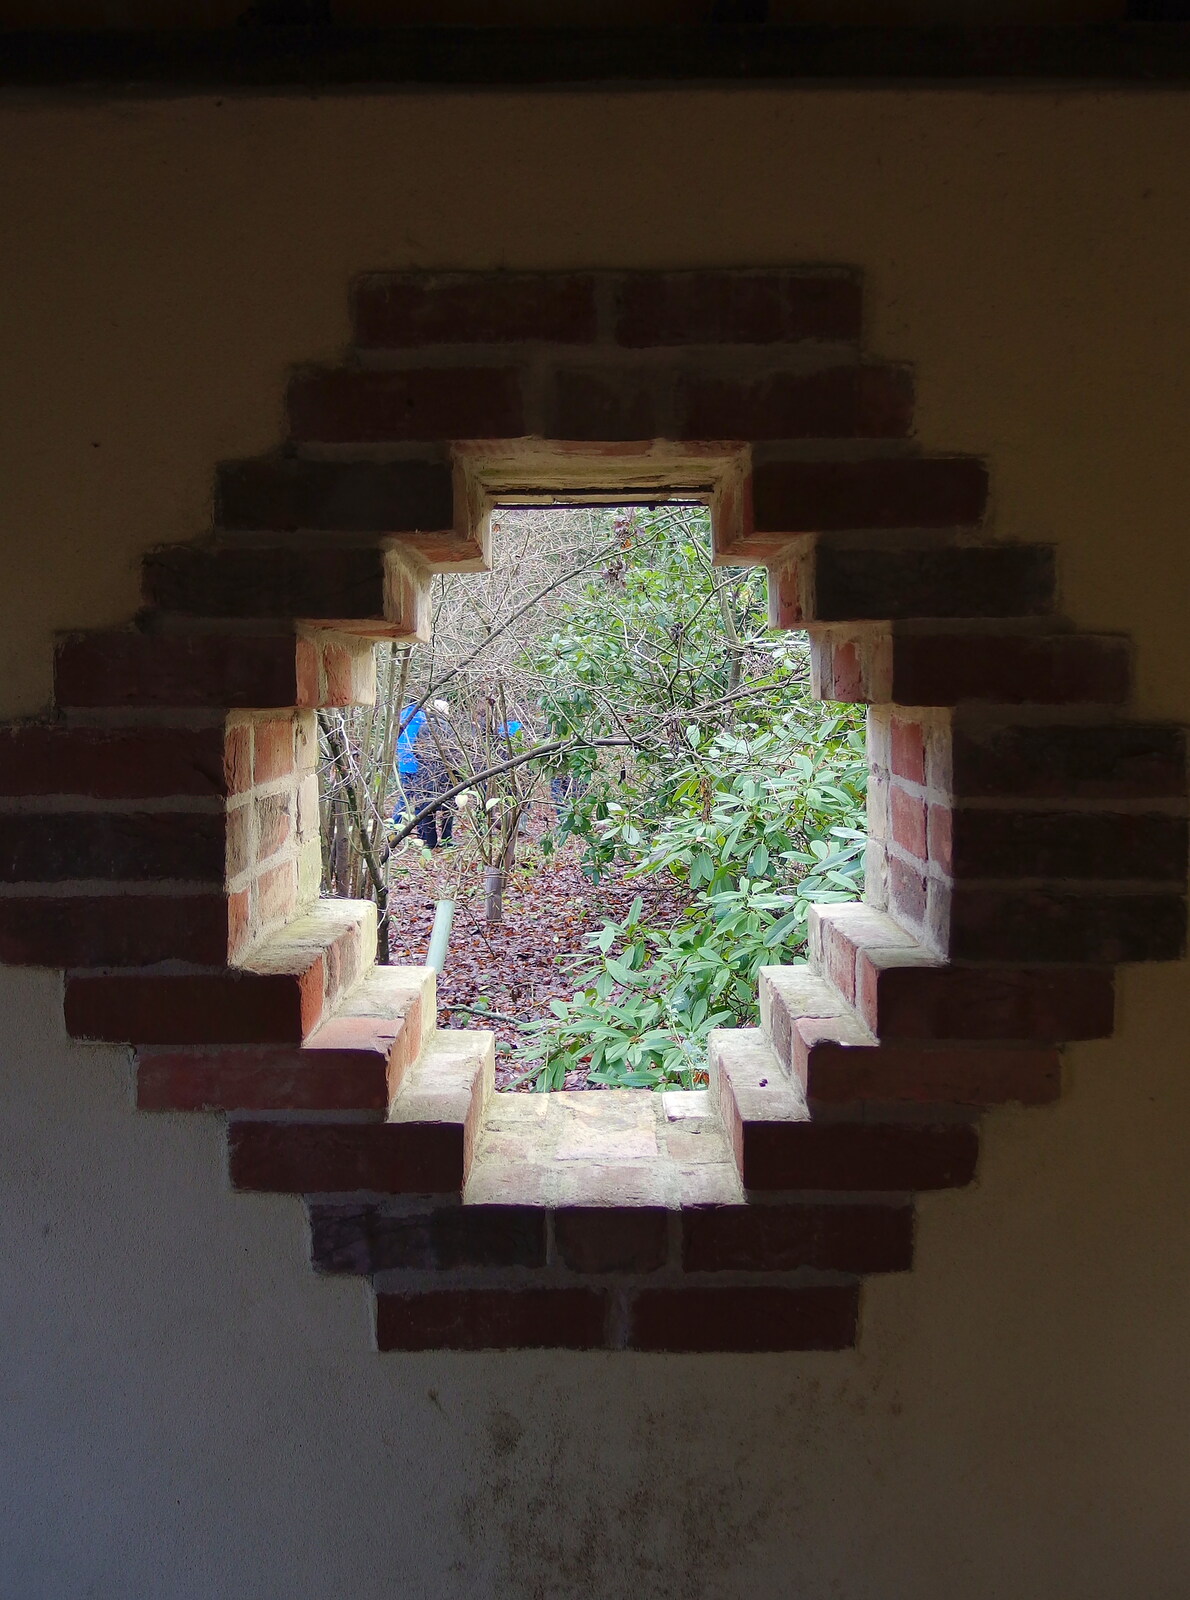 The brick window in the folly from A Boxing Day Walk, Thornham Estate, Suffolk - 26th December 2013